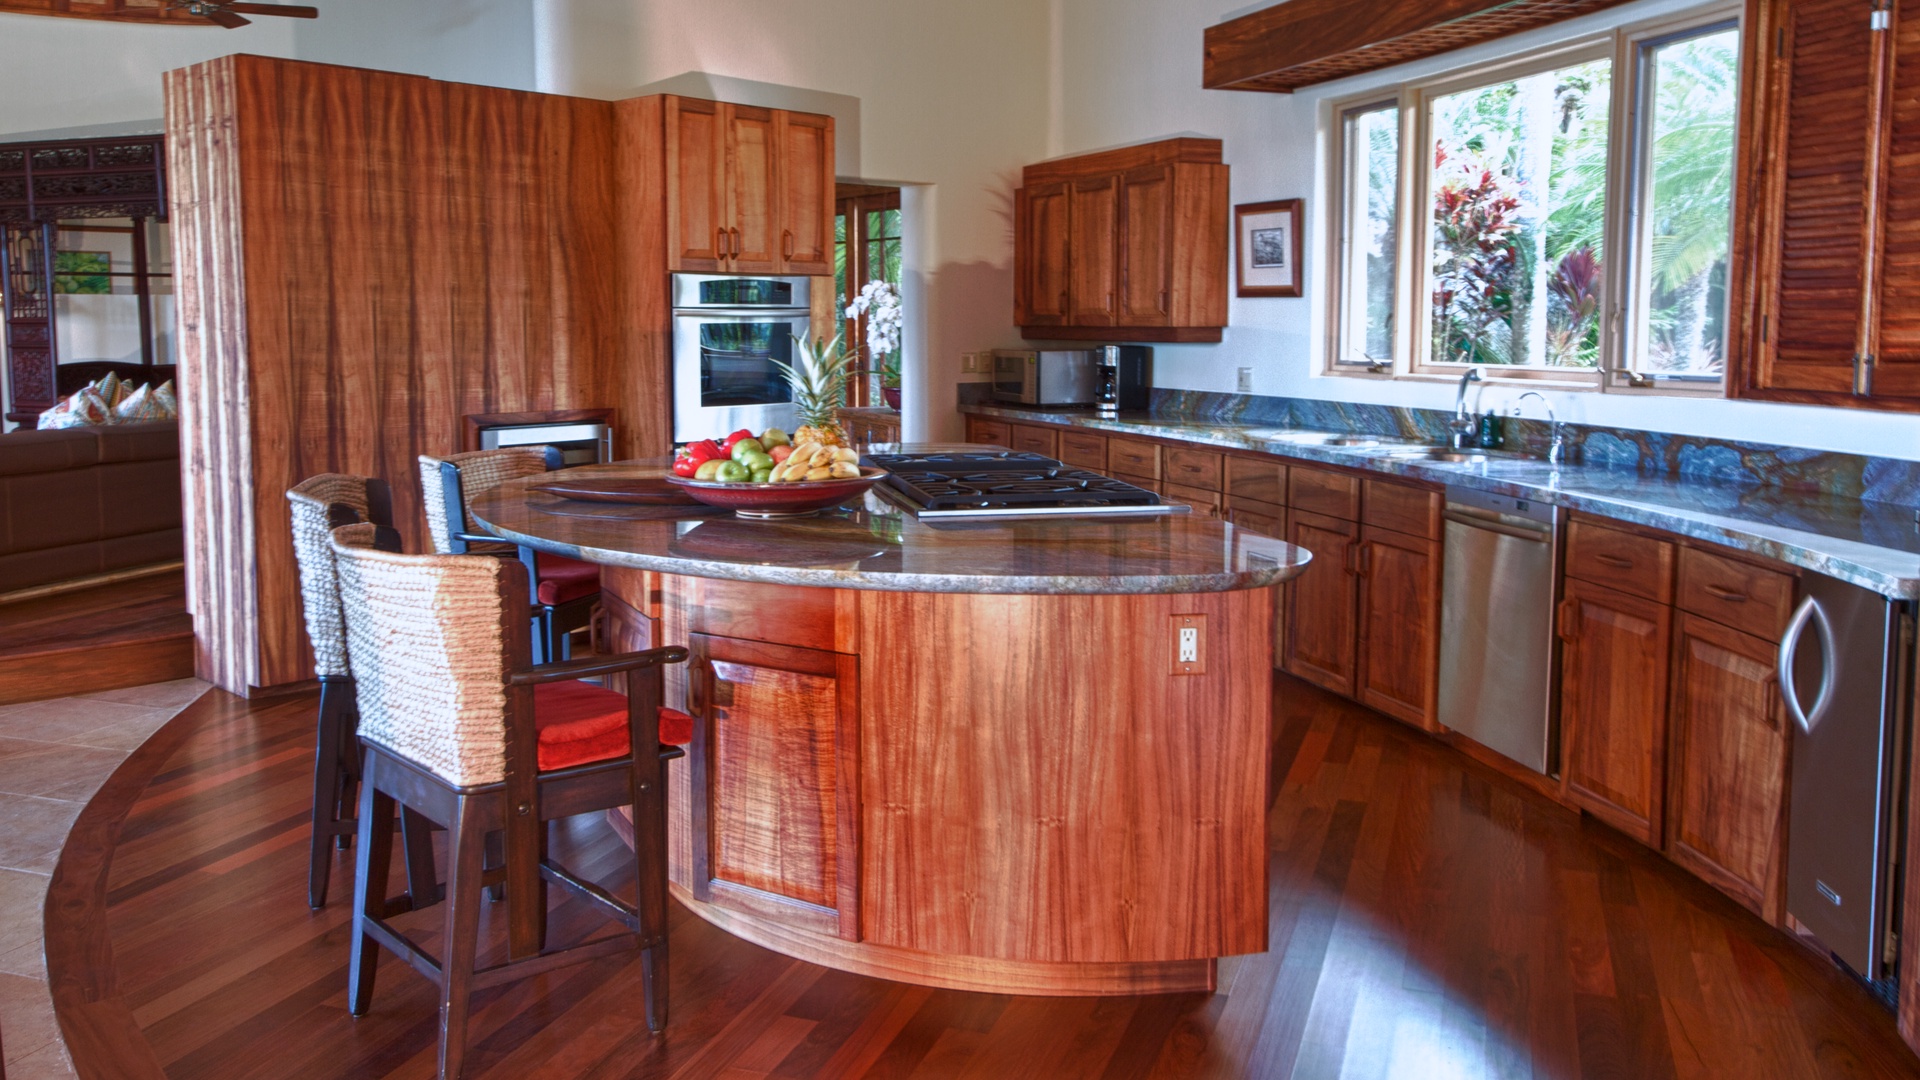 Kailua Vacation Rentals, Paul Mitchell Estate- 5 Bedroom* - Kitchen in Main House featuring solid Koa wood cabinetry